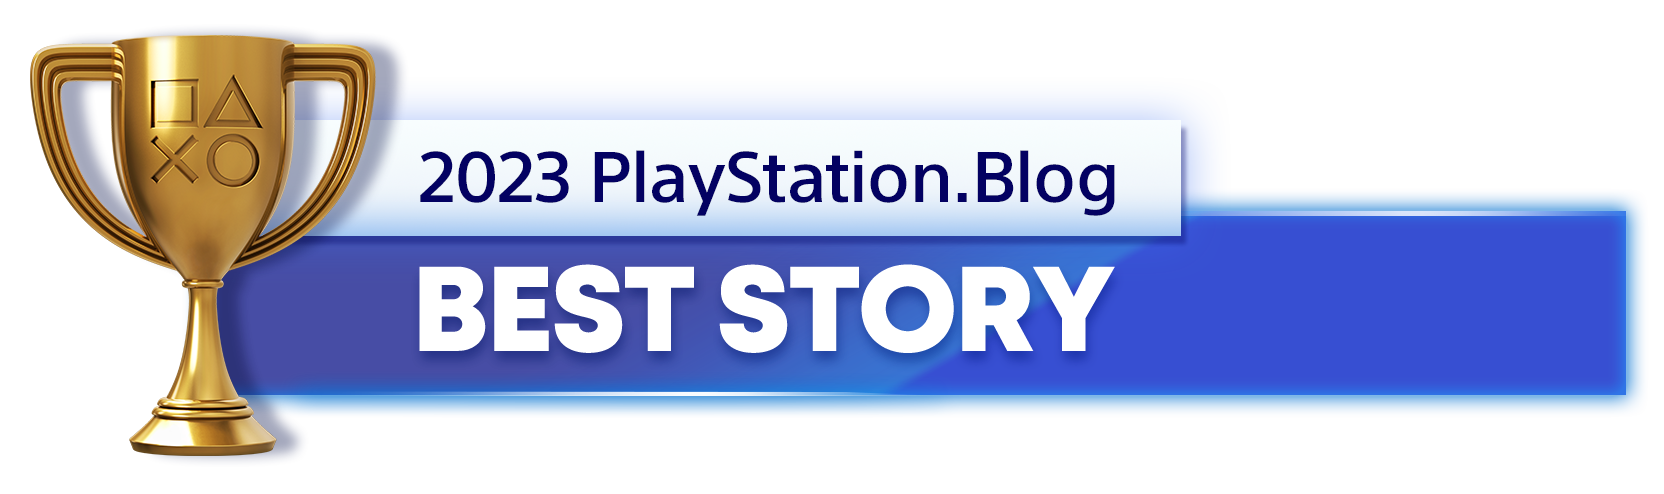  "Gold Trophy for the 2023 PlayStation Blog Best Story Winner"